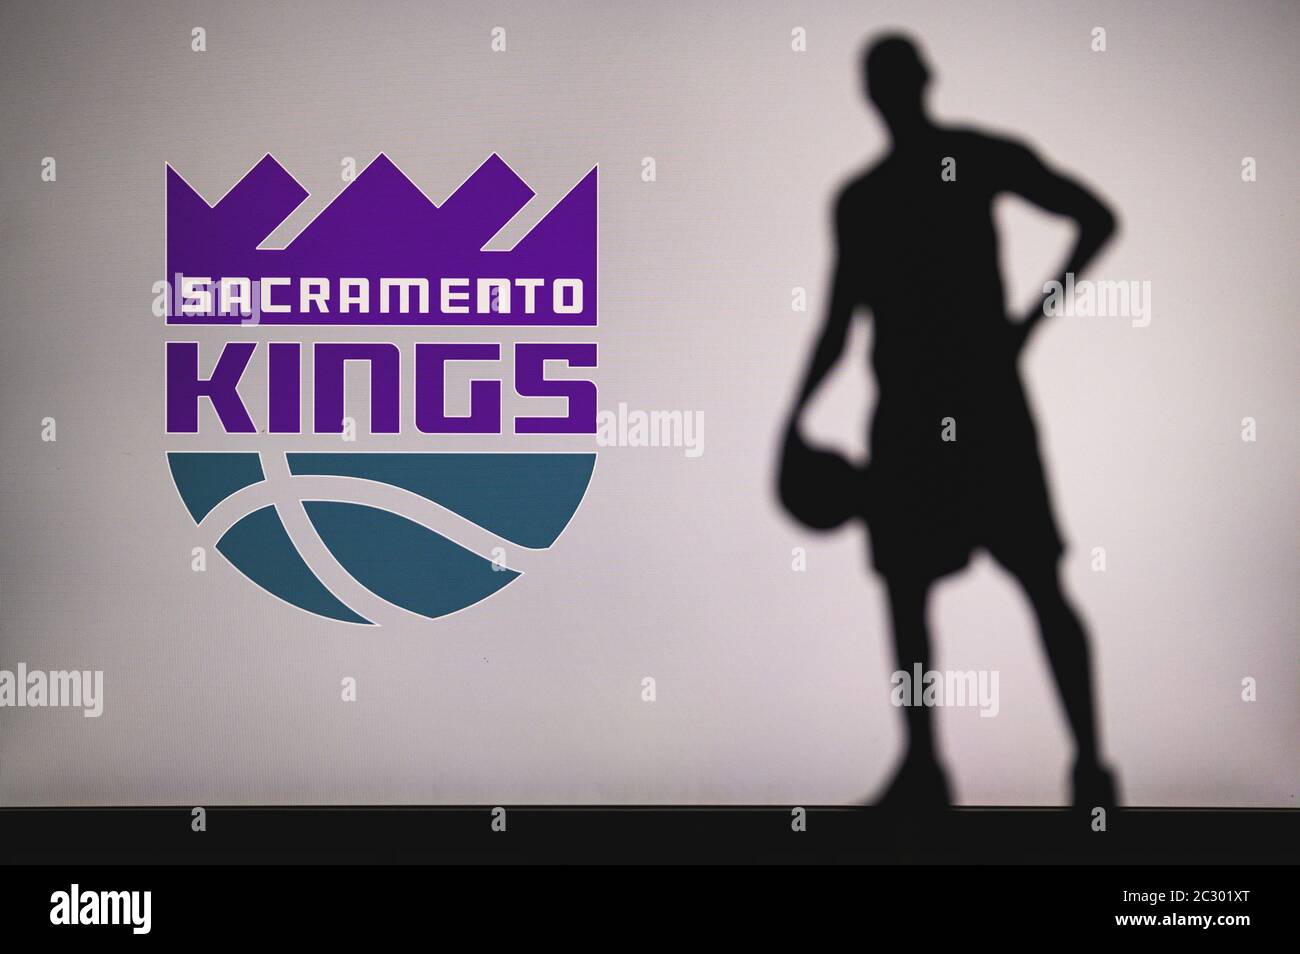 NEW YORK, USA, JUN 18, 2020: Sacramento Kings logo of professional basketball club in american league. Silhouette of basket player in foreground. Spor Stock Photo